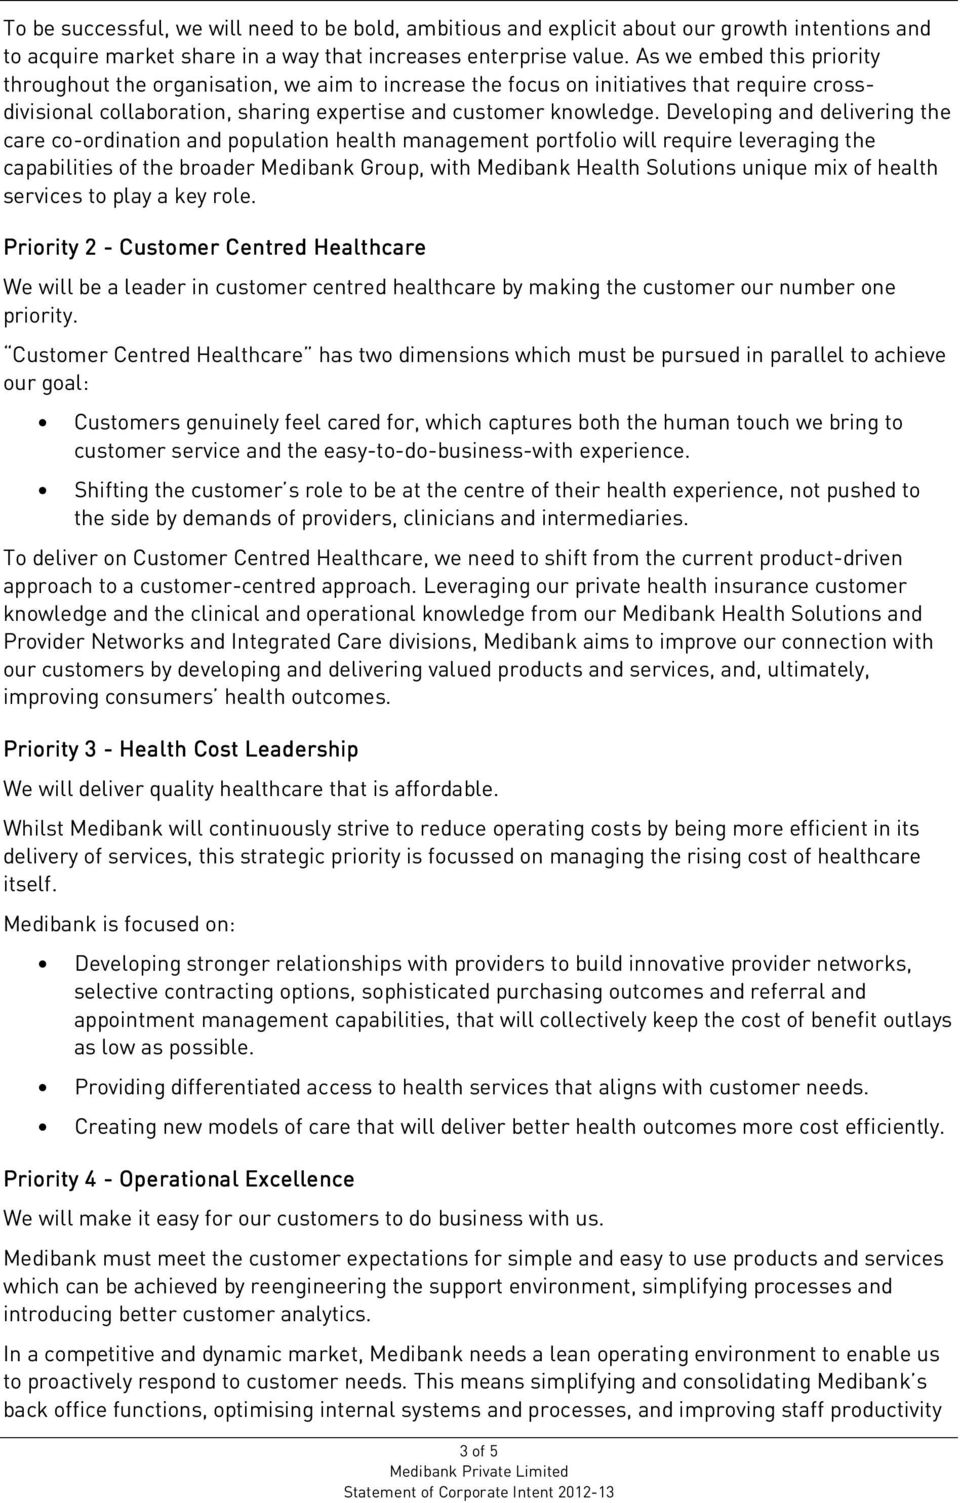 Developing and delivering the care co-ordination and population health management portfolio will require leveraging the capabilities of the broader Medibank Group, with Medibank Health Solutions